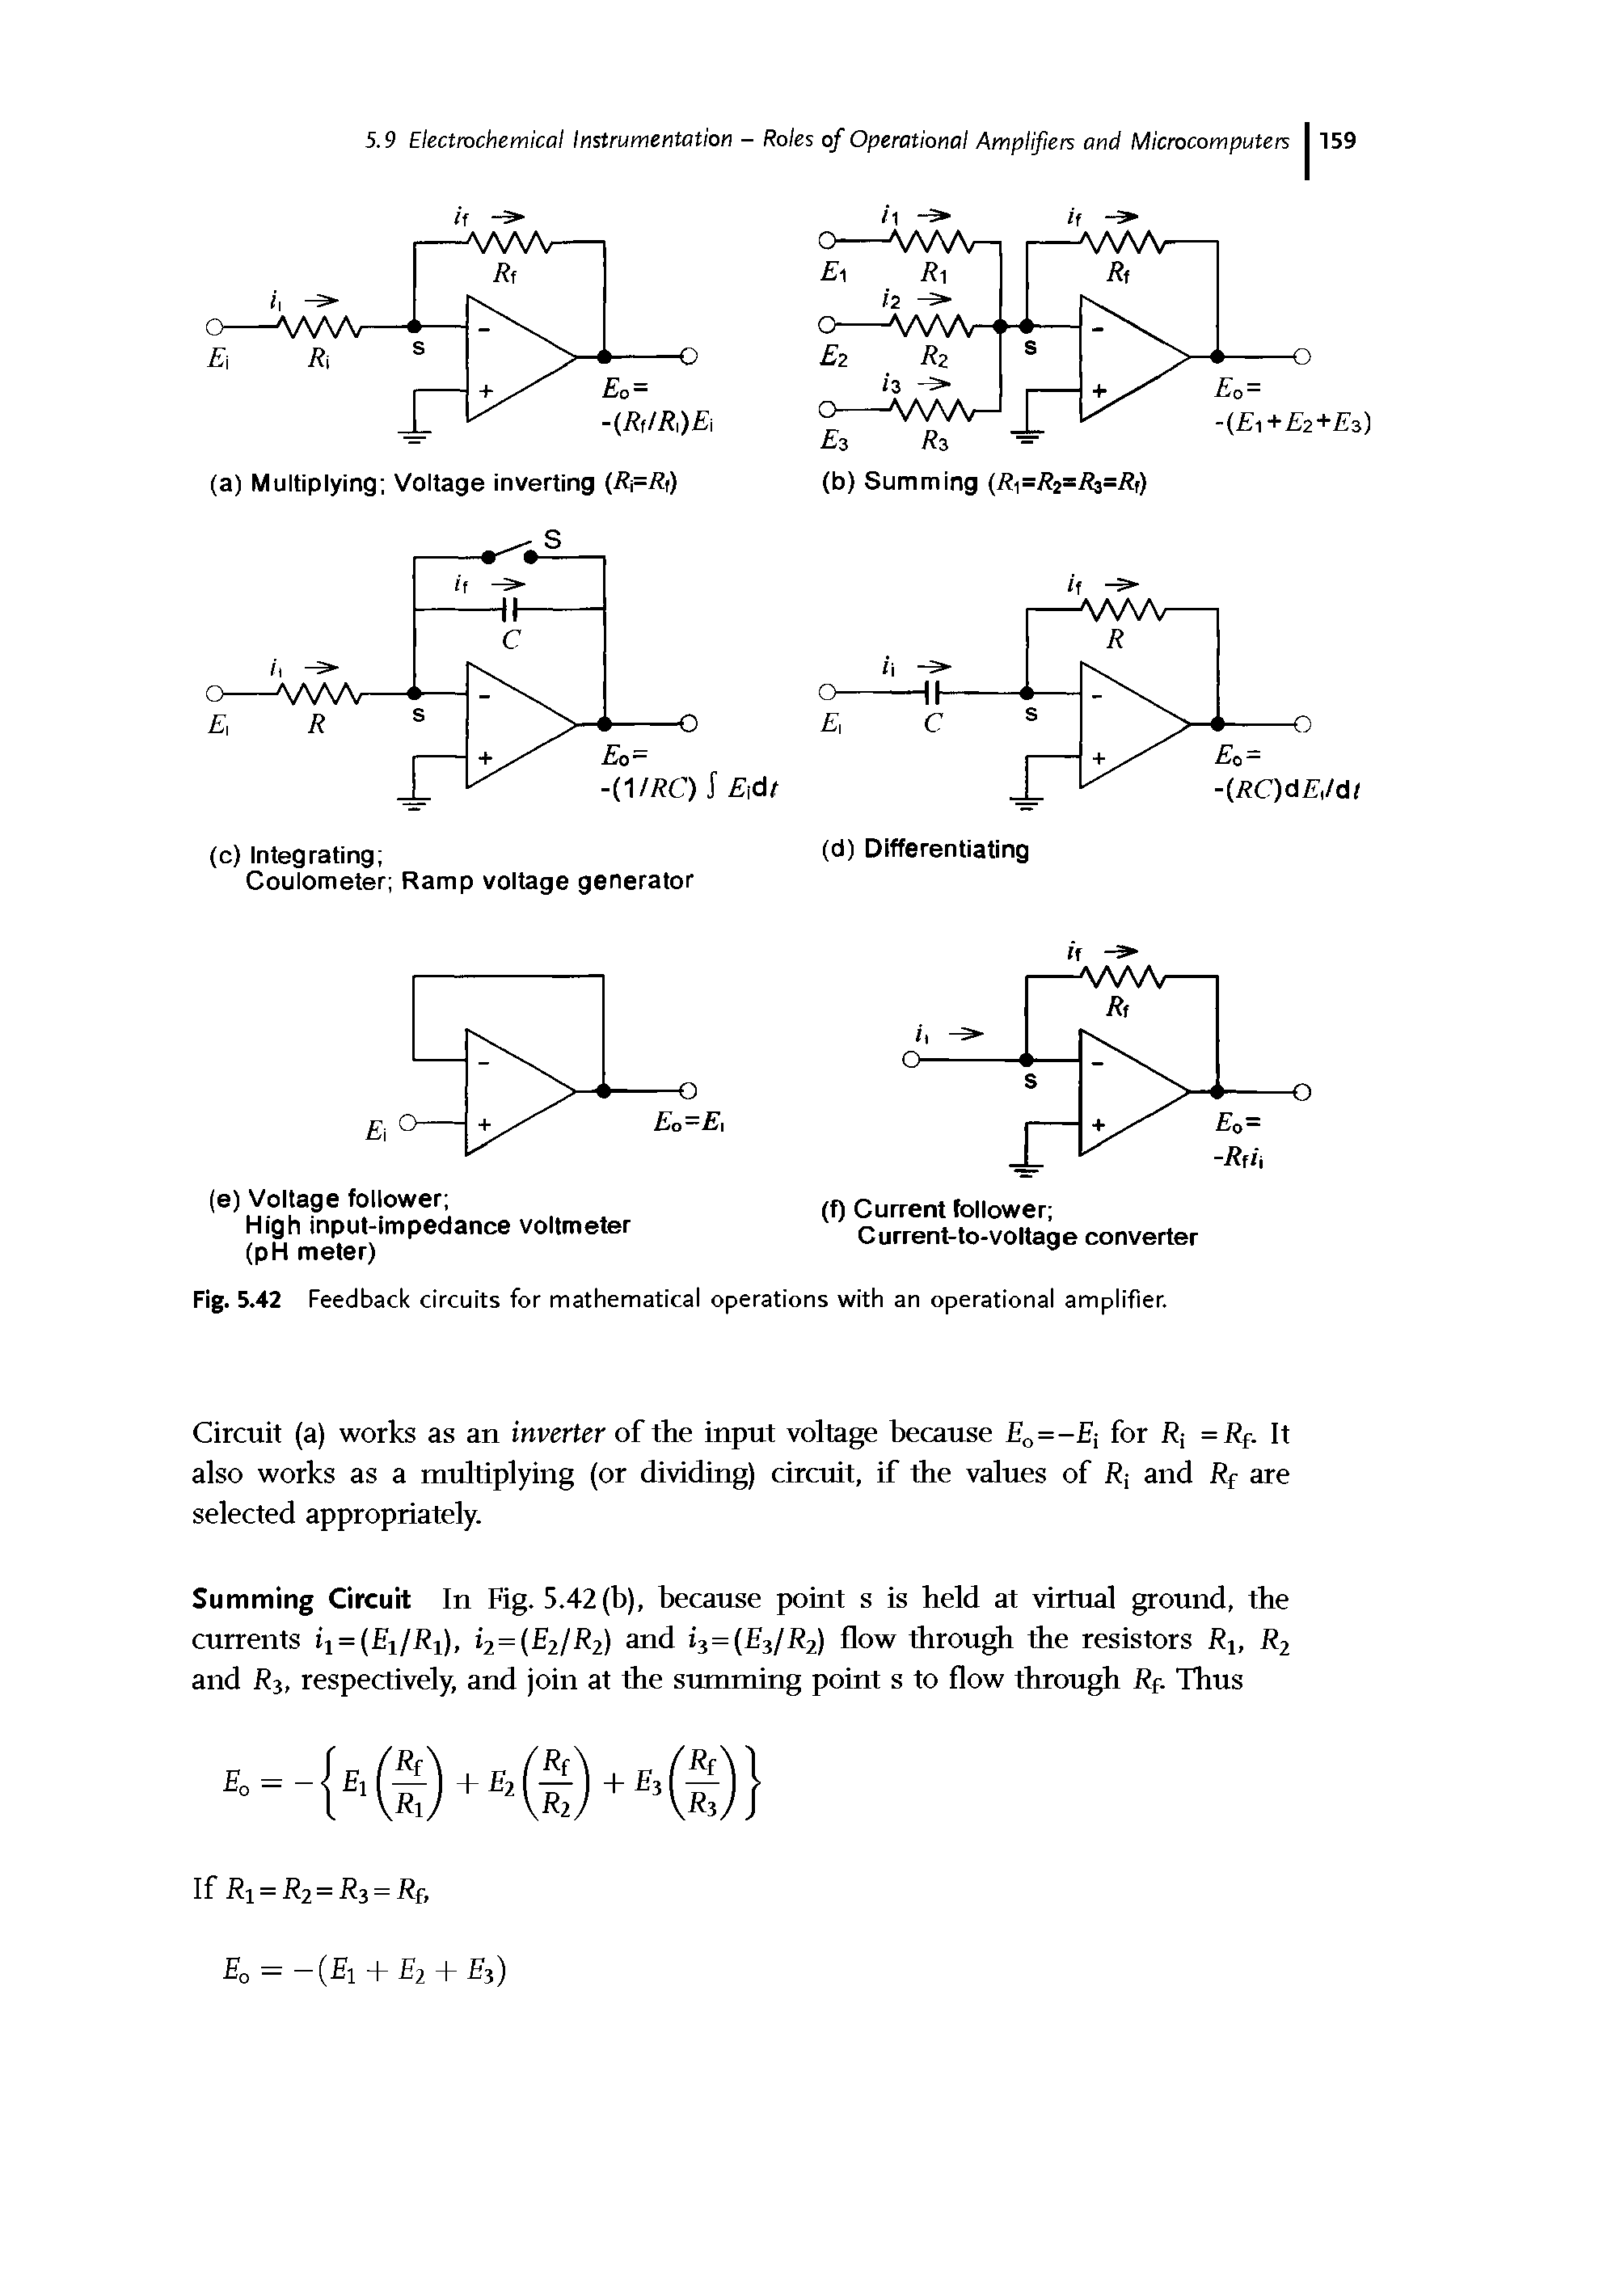 Fig. 5.42 Feedback circuits for mathematical operations with an operational amplifier.